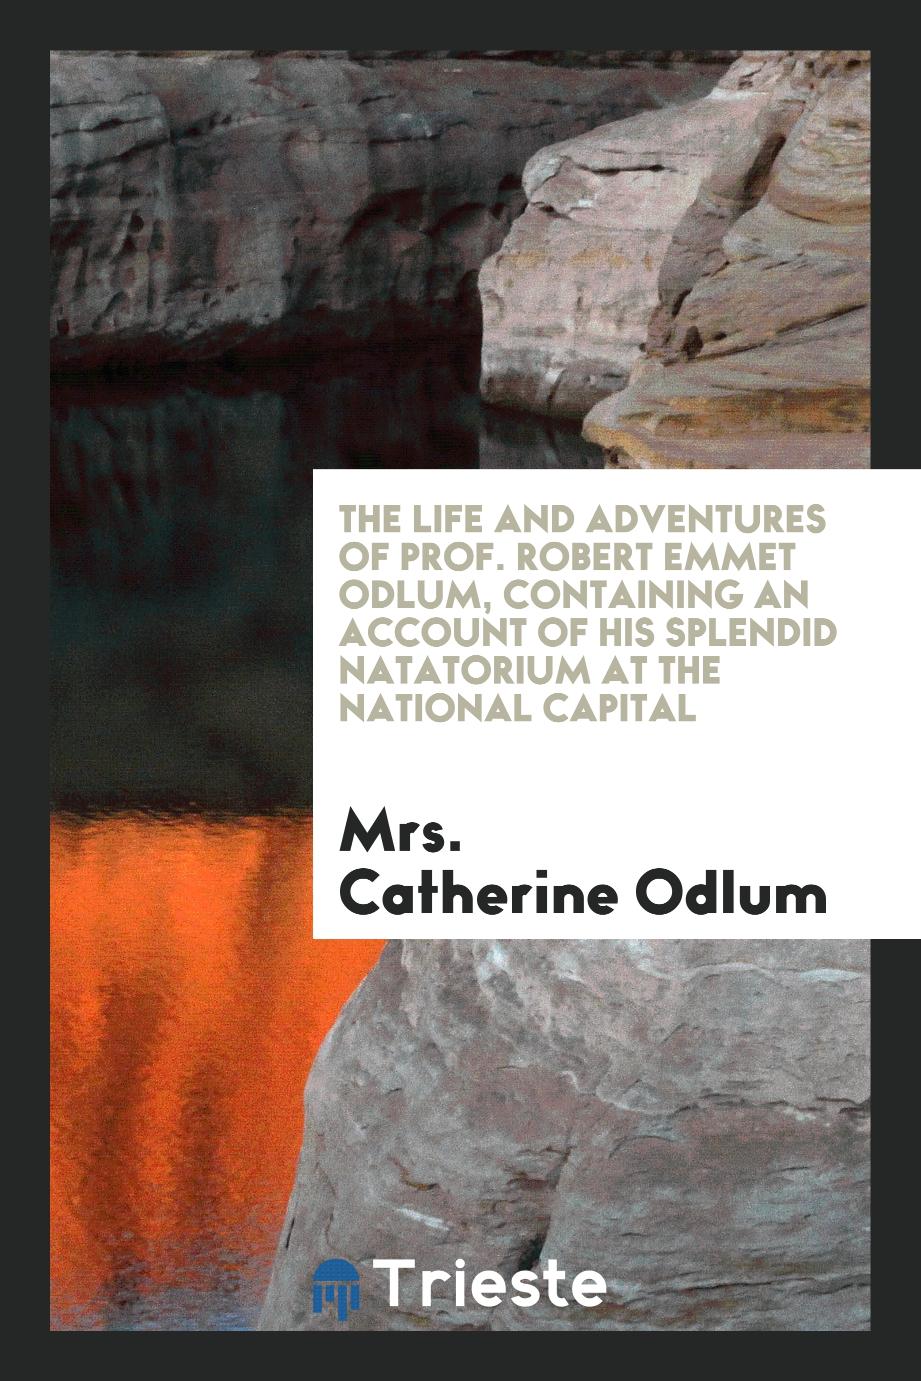 The life and adventures of Prof. Robert Emmet Odlum, containing an account of his splendid natatorium at the National Capital